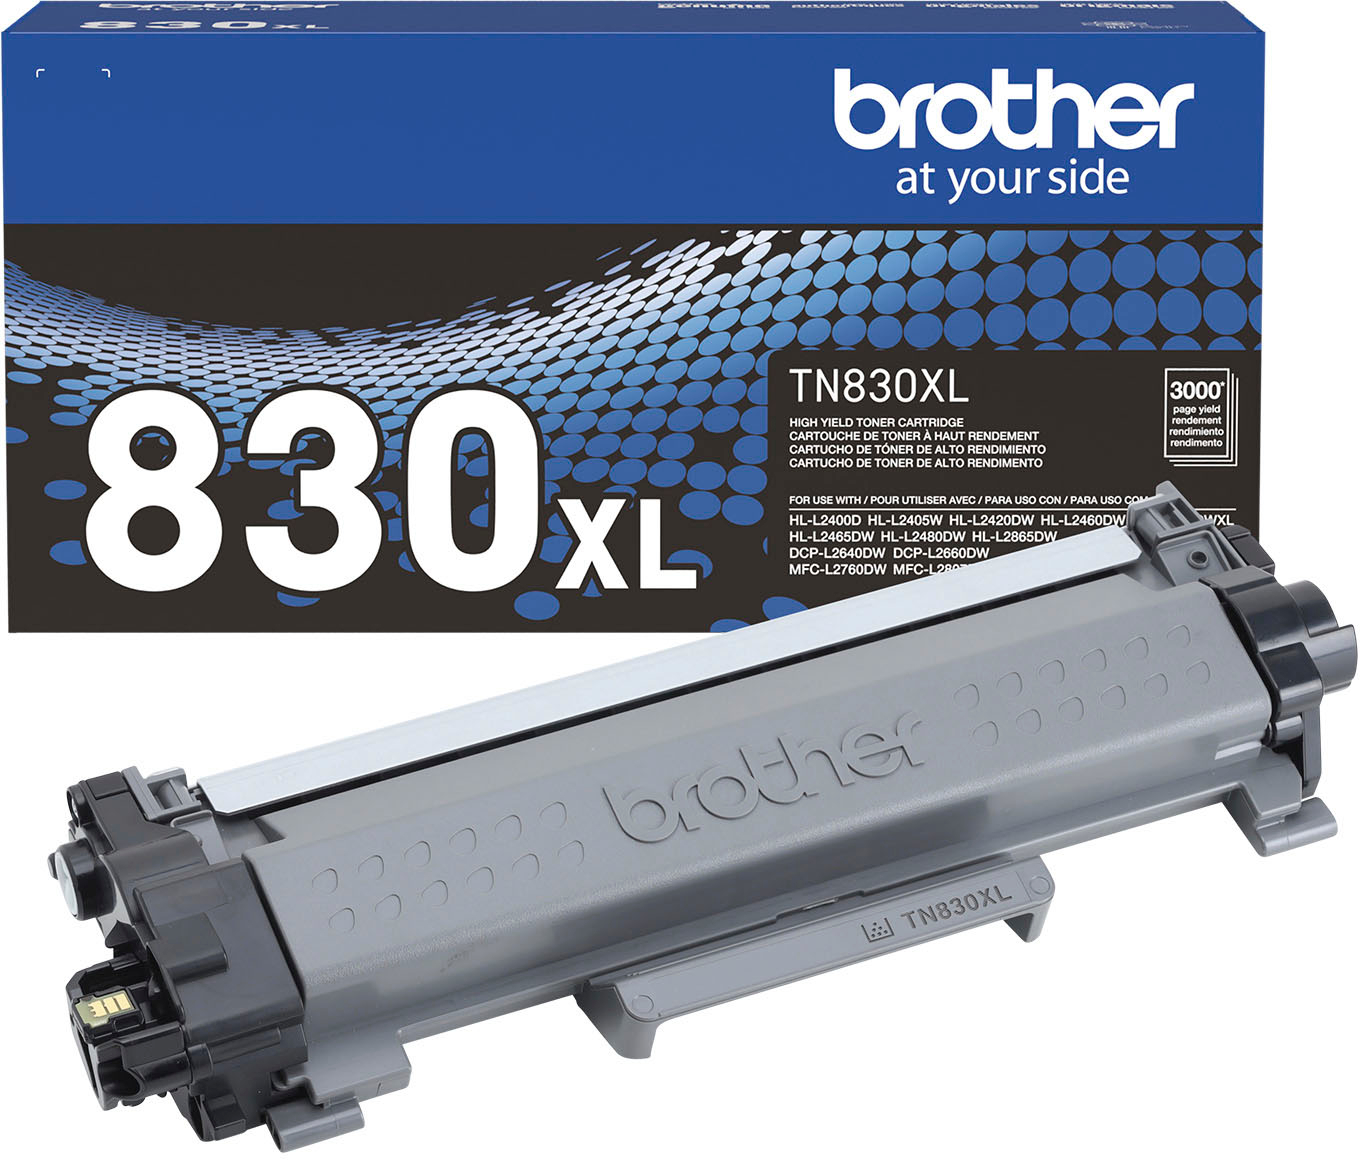 High-quality Compatible Toner Cartridge for Brother - Print-Rite